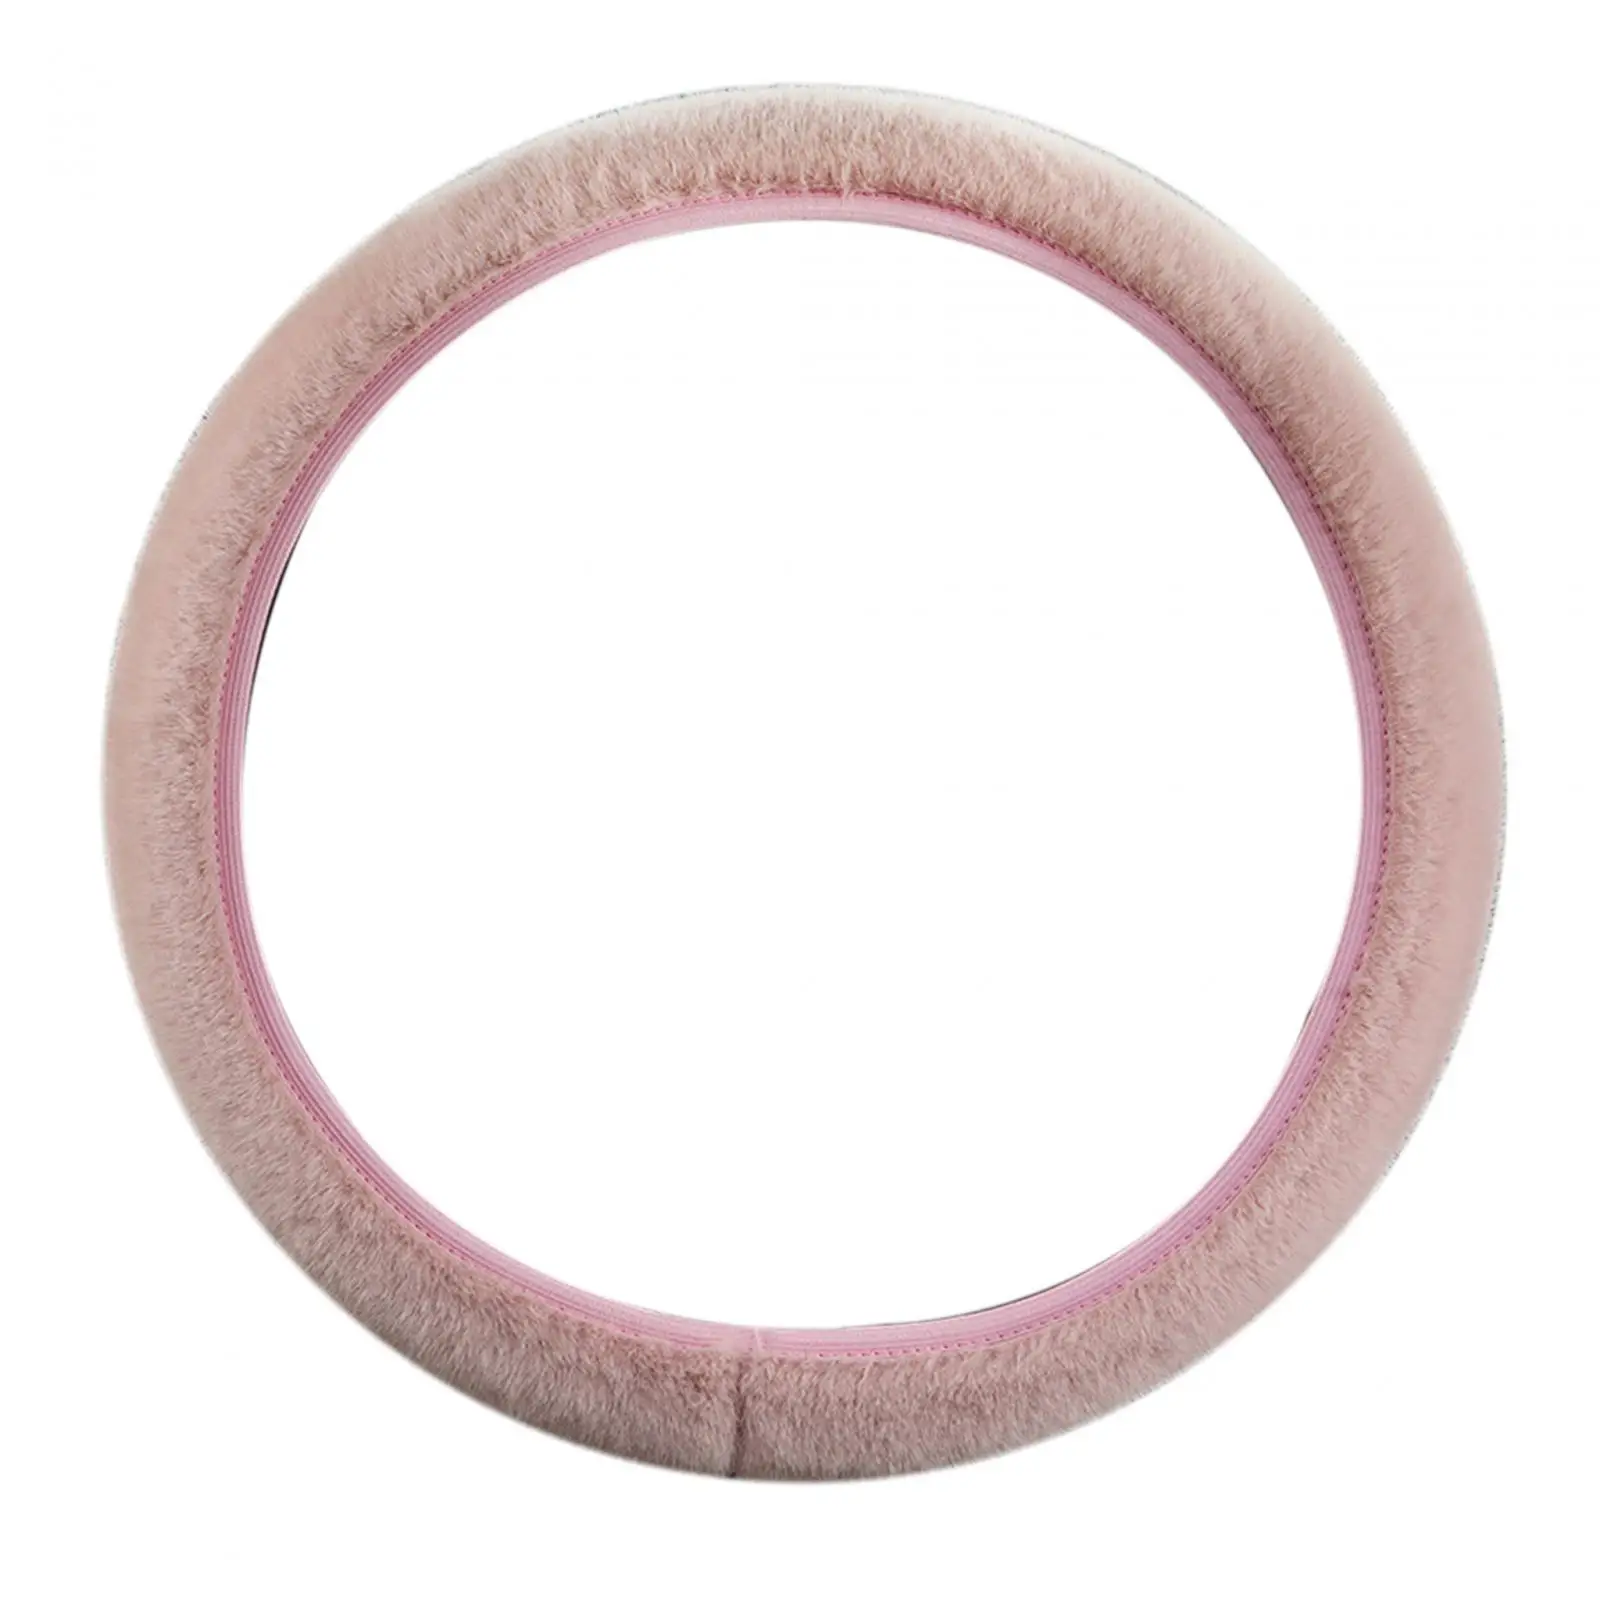 15 inch winter plush steering wheel cover protector, non-slip, easy to install,